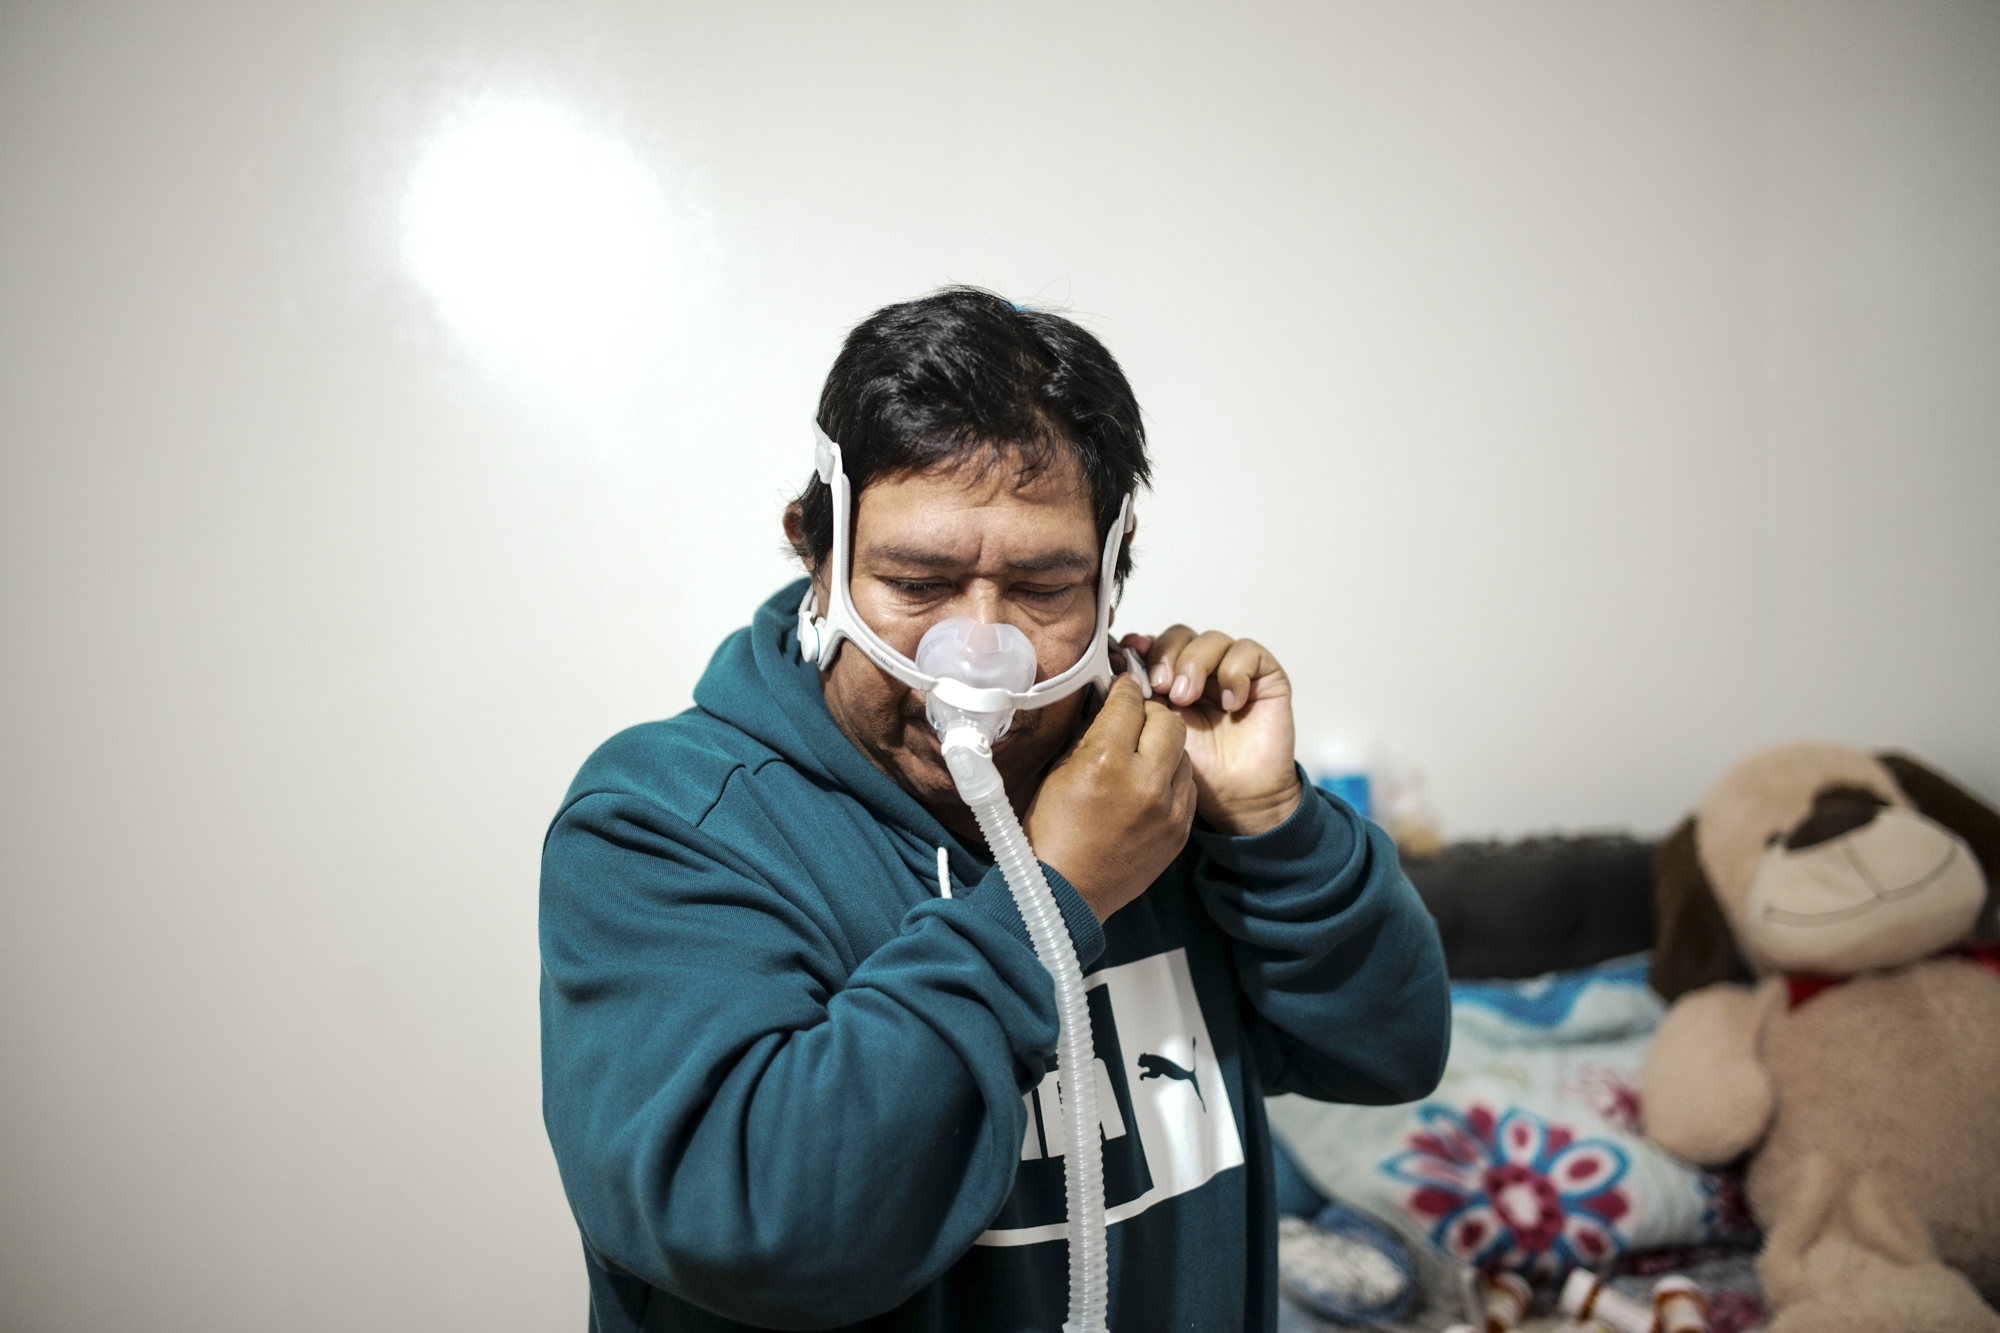 A middle-aged Latino man puts on an oxygen mask at home.